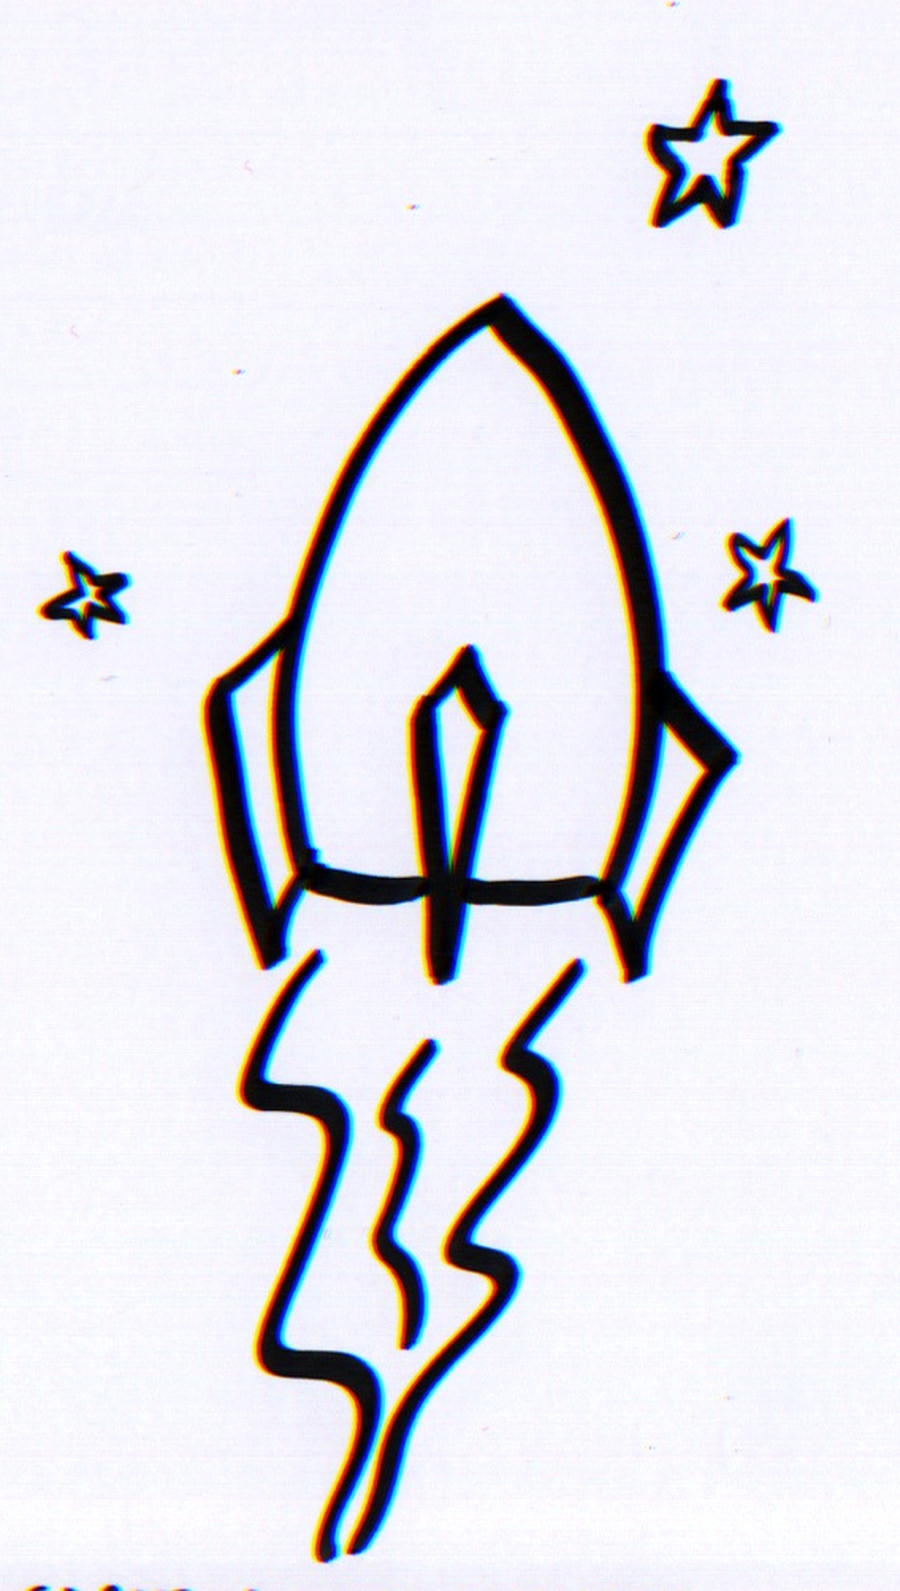 jeannelking.com | How To Draw A Rocket Ship in Three Easy Steps